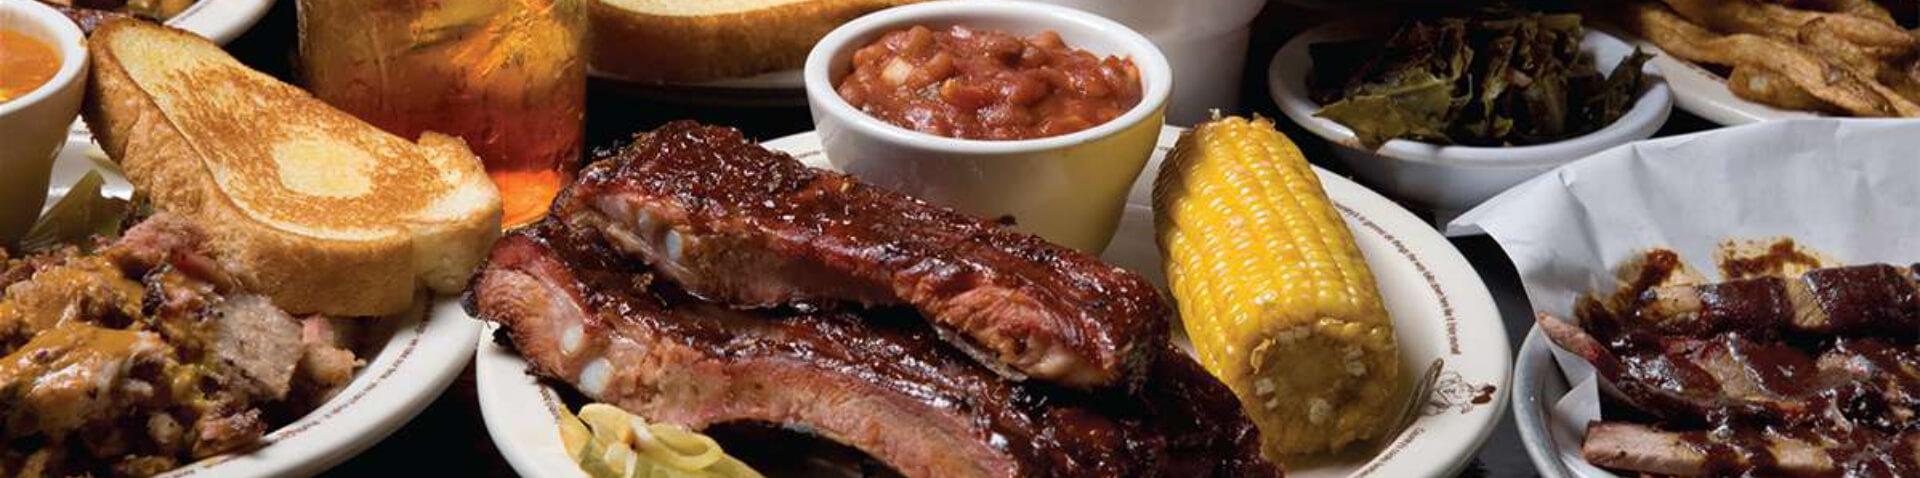 feast with ribs, toast, corn on the cob, beans and more